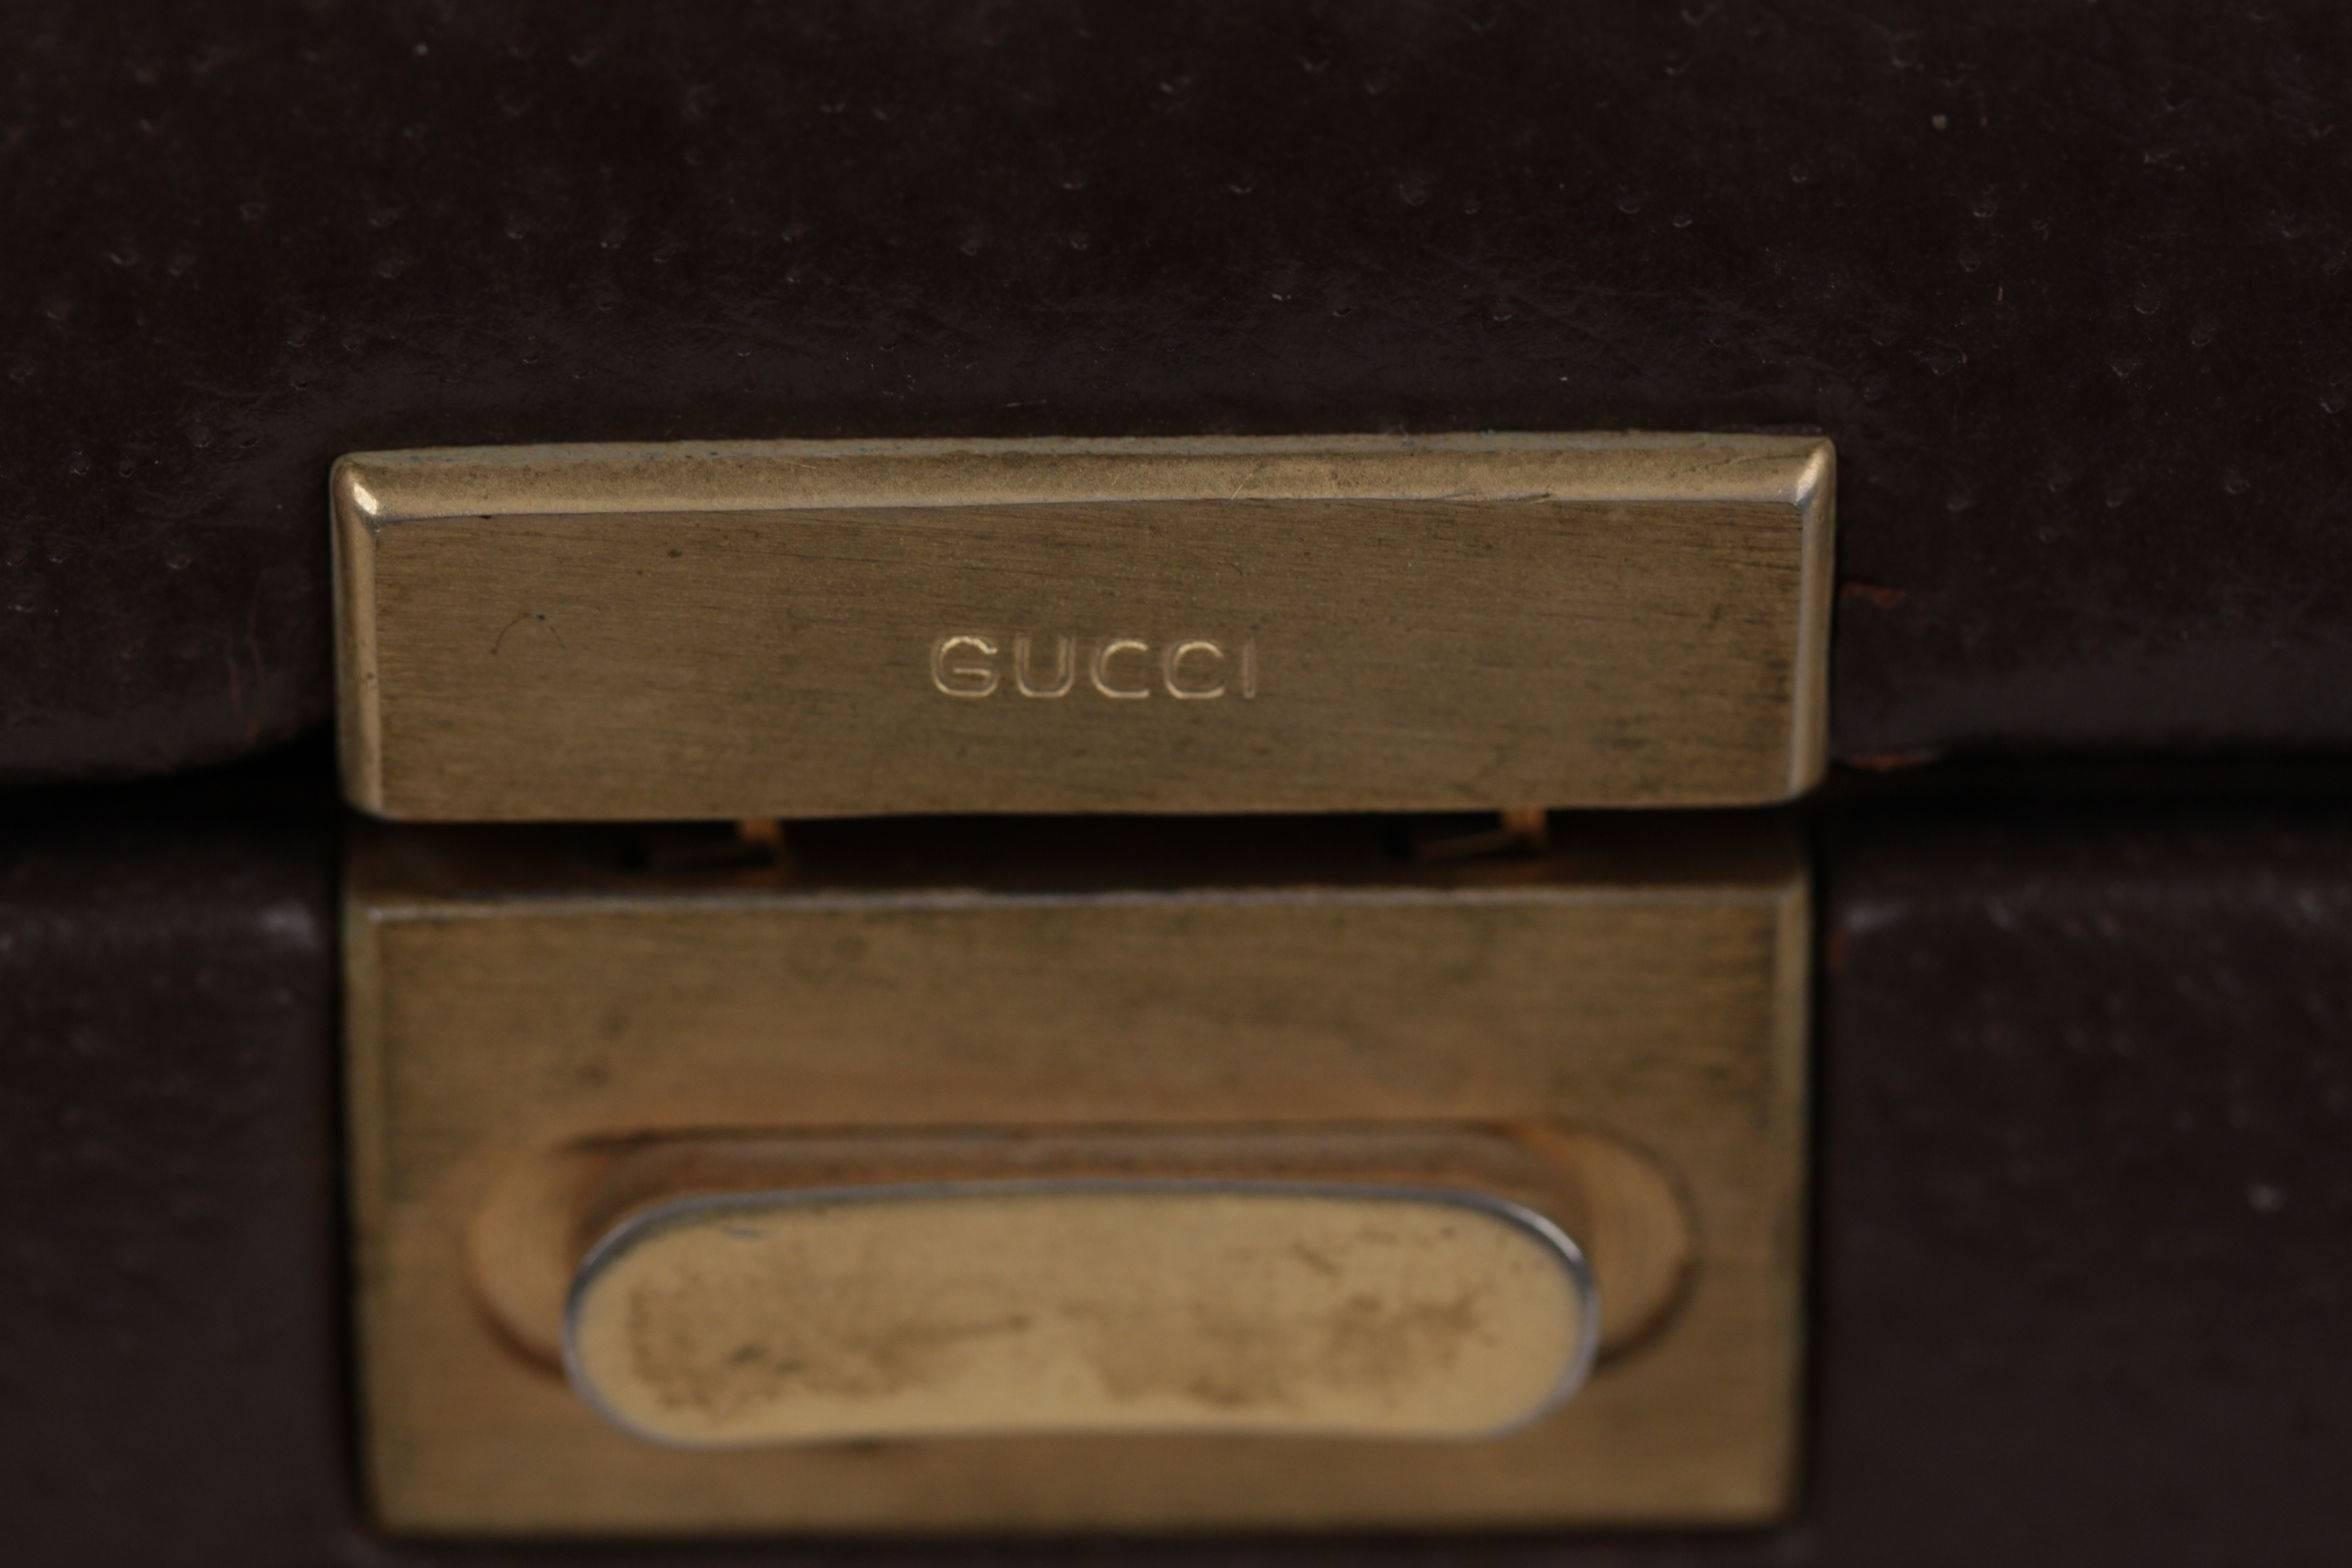  Brand: GUCCI - Made in italy

Logos / Tags: 'GUCCI Boutiuqe - Made in Italy' embossed on the bottom of the case, GUCCI engraved on main closure

Condition (please read our condition chart below): FAIR CONDITION: Noticeable wear or defect. Have